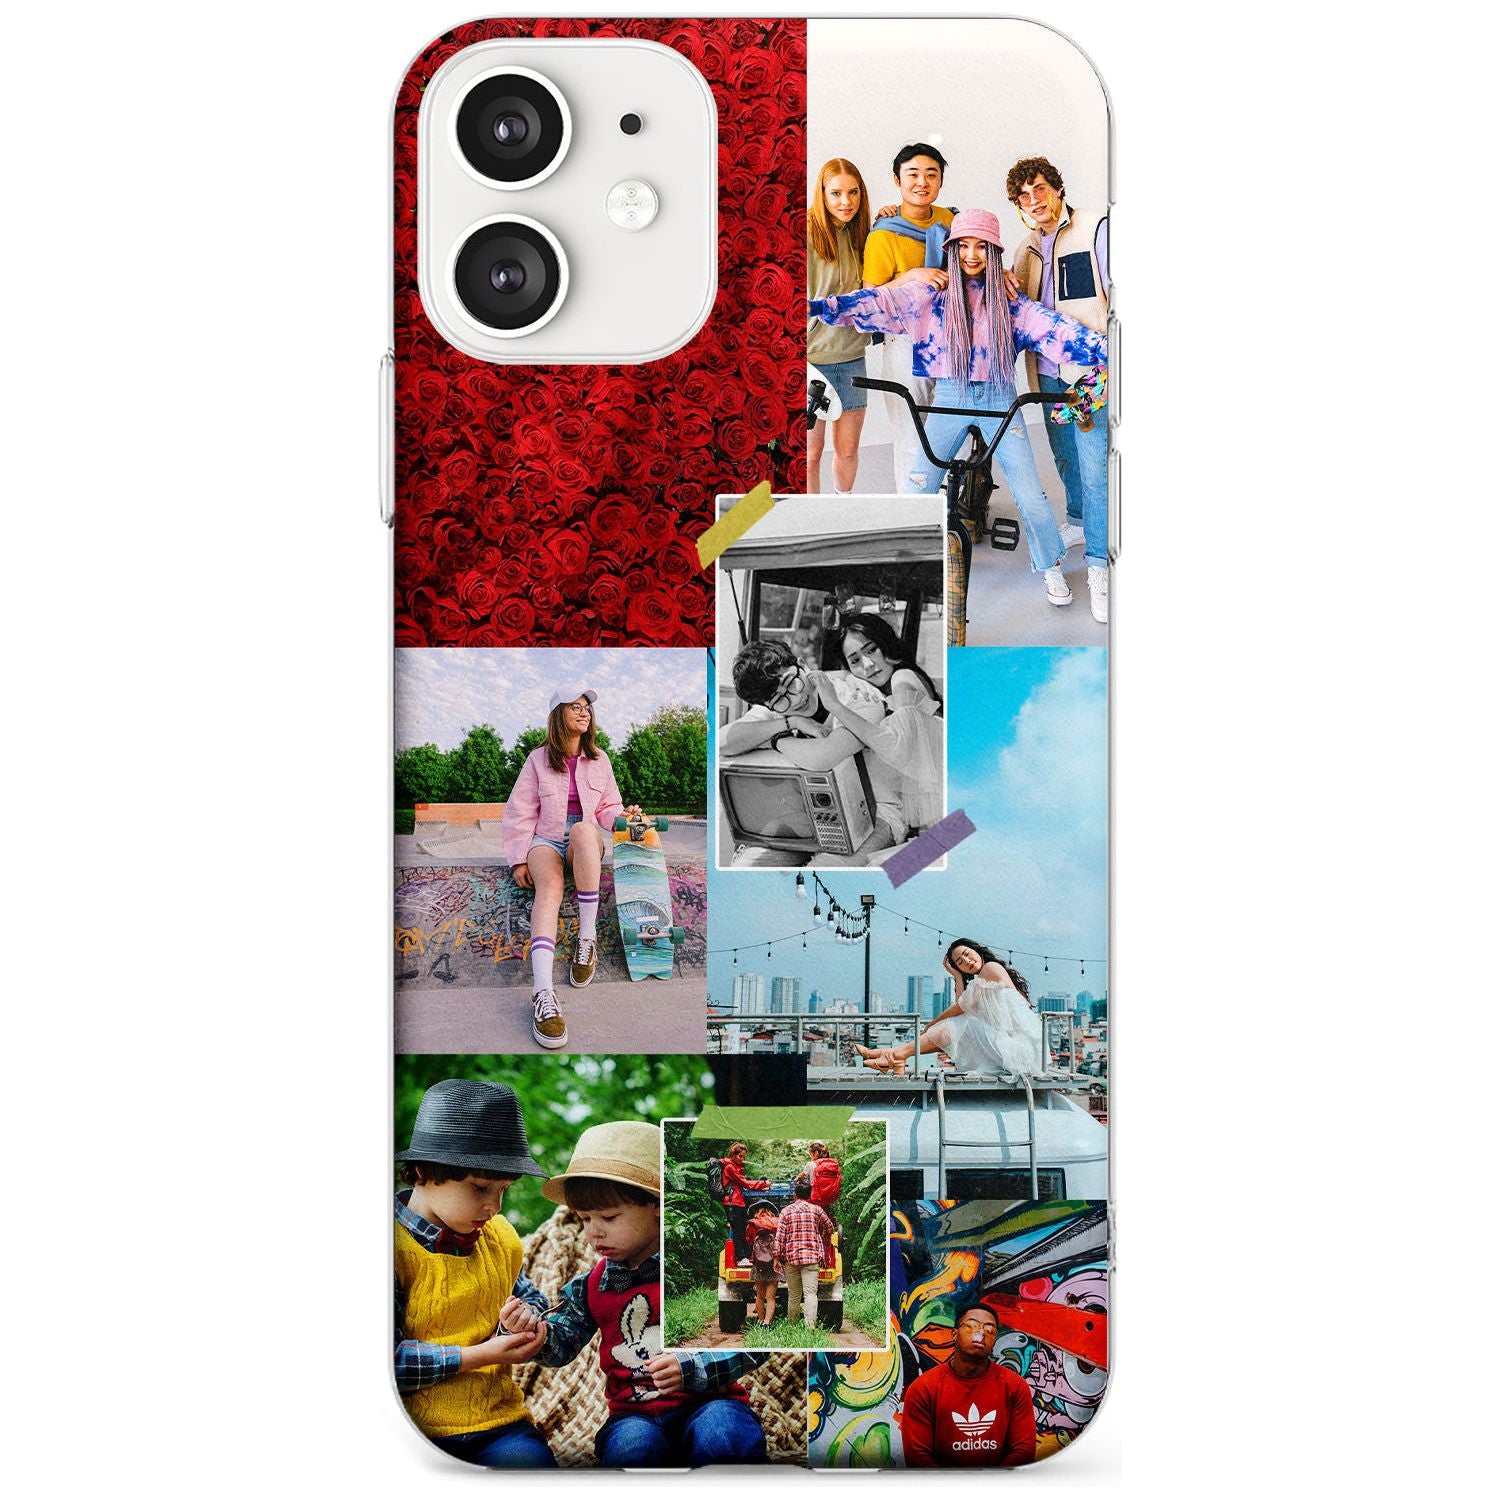 Personalised Photo Collage Slim TPU Phone Case for iPhone 11